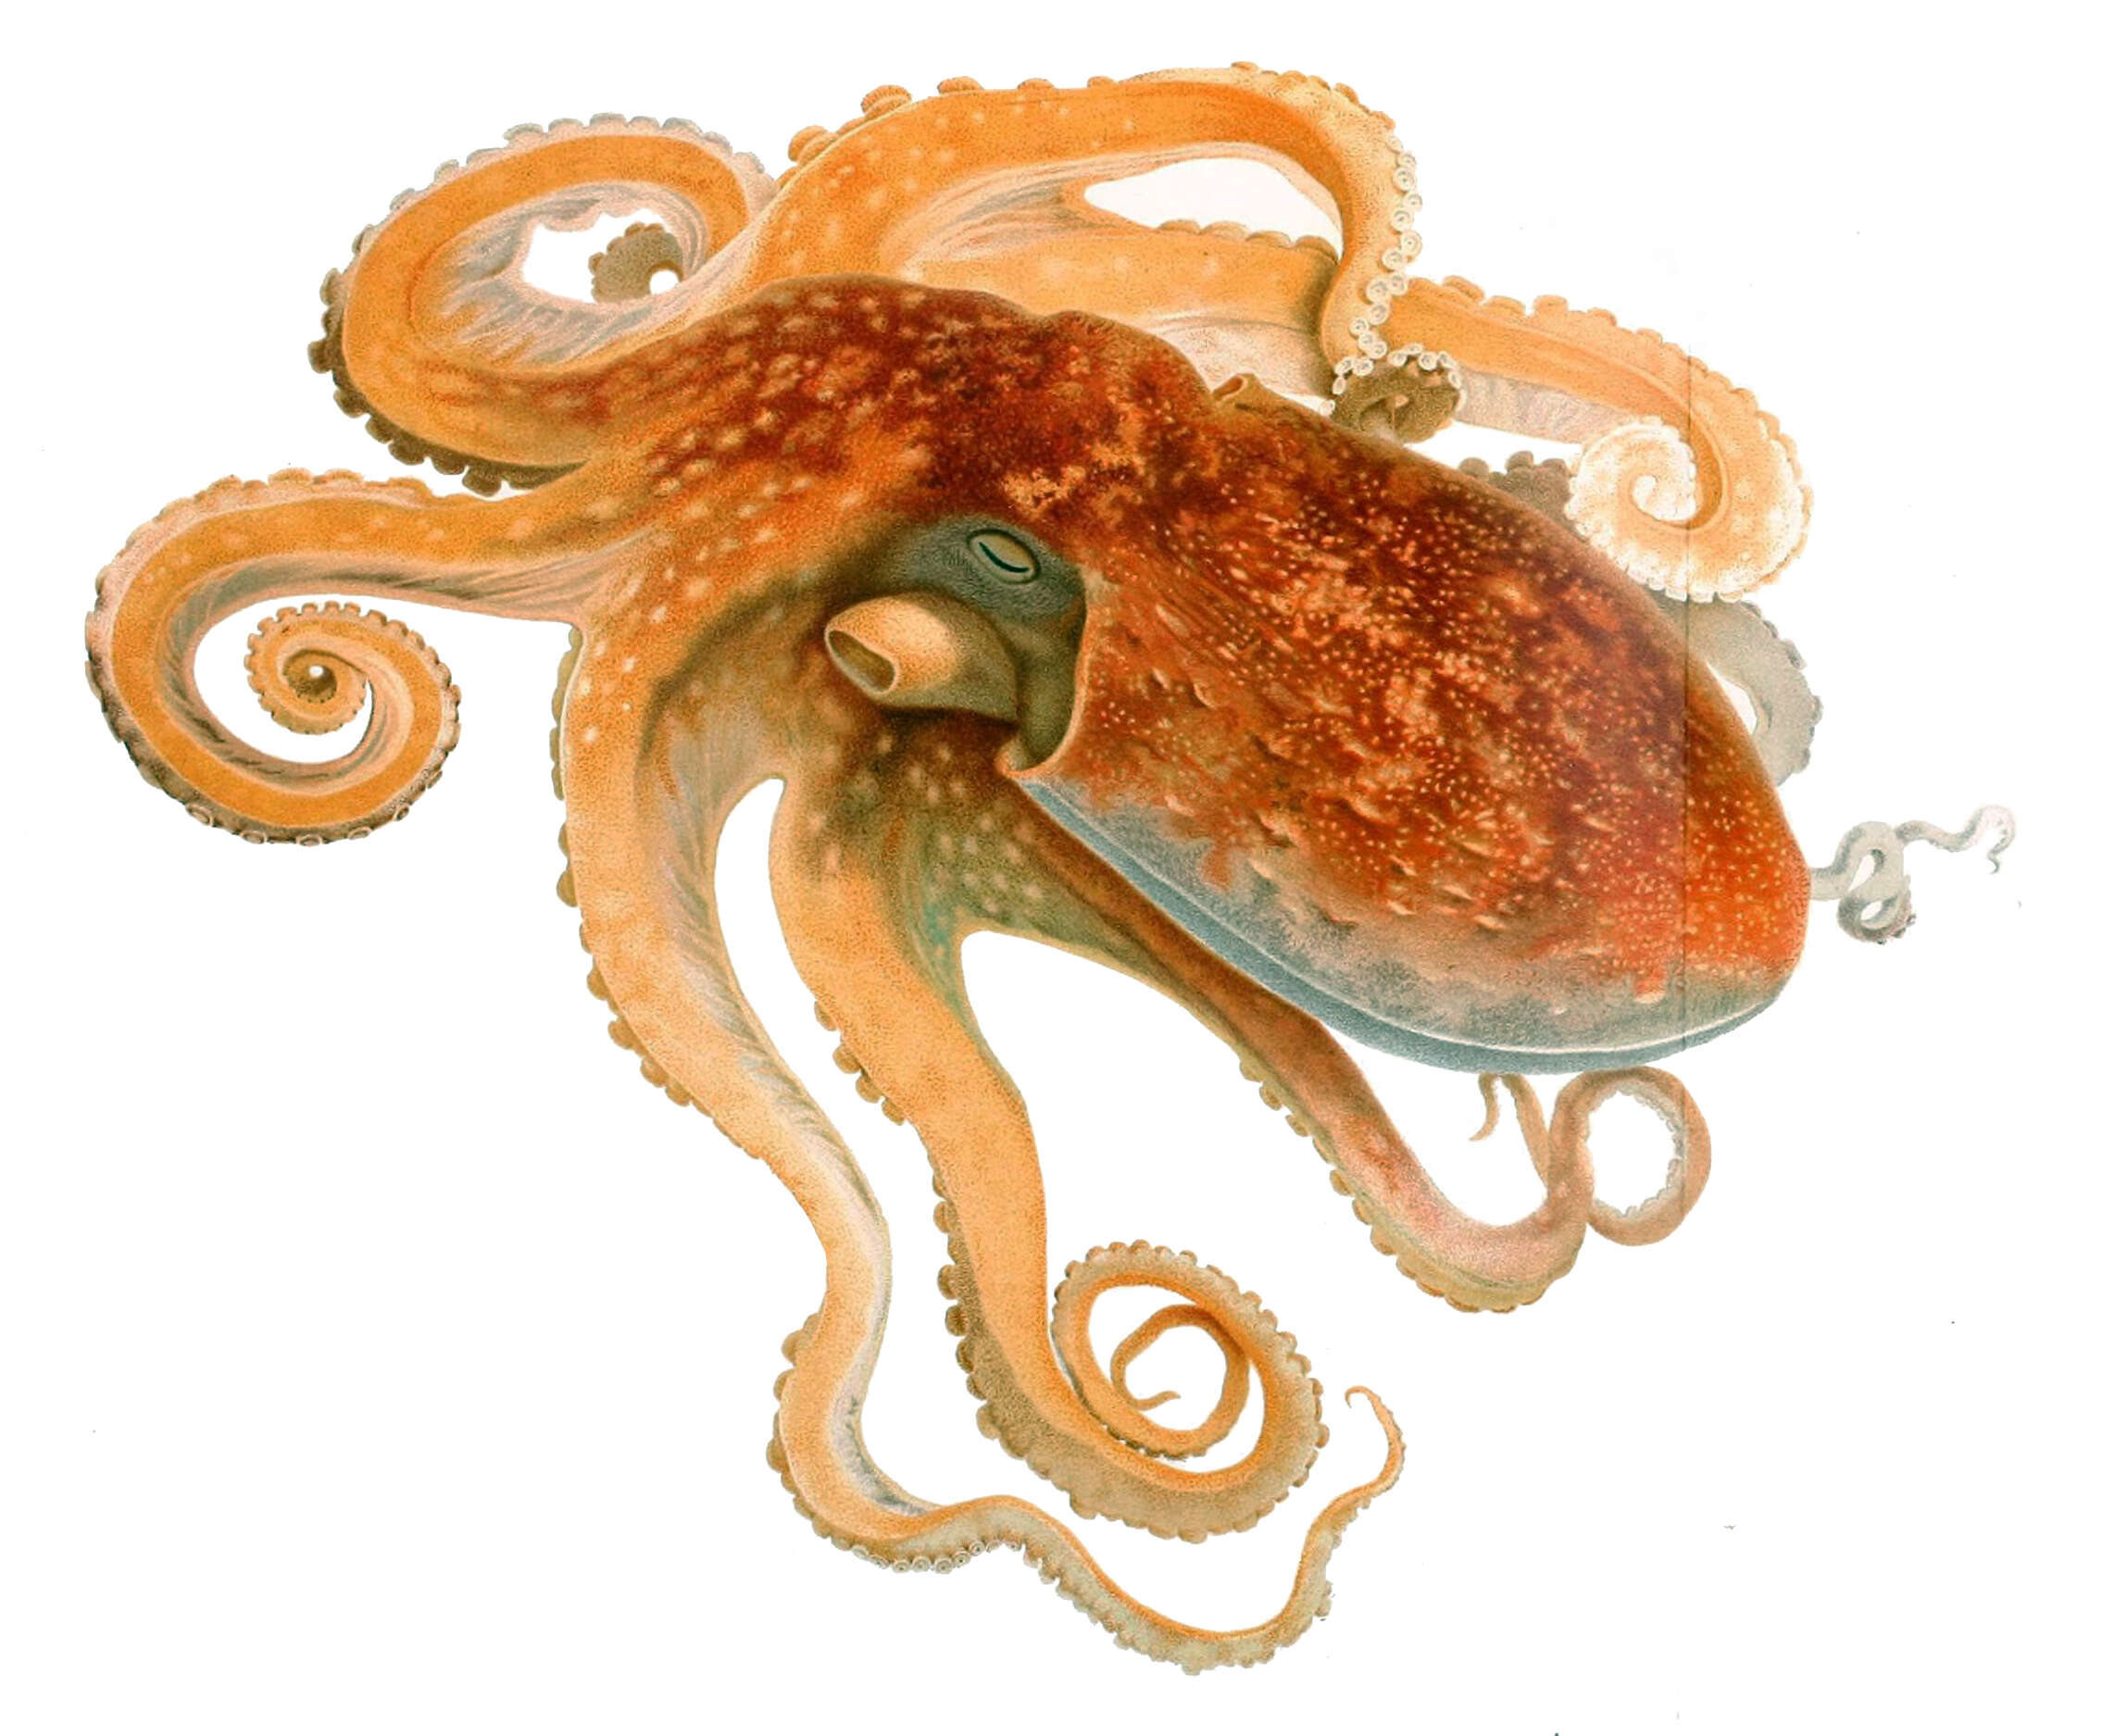 Image of Curled octopus